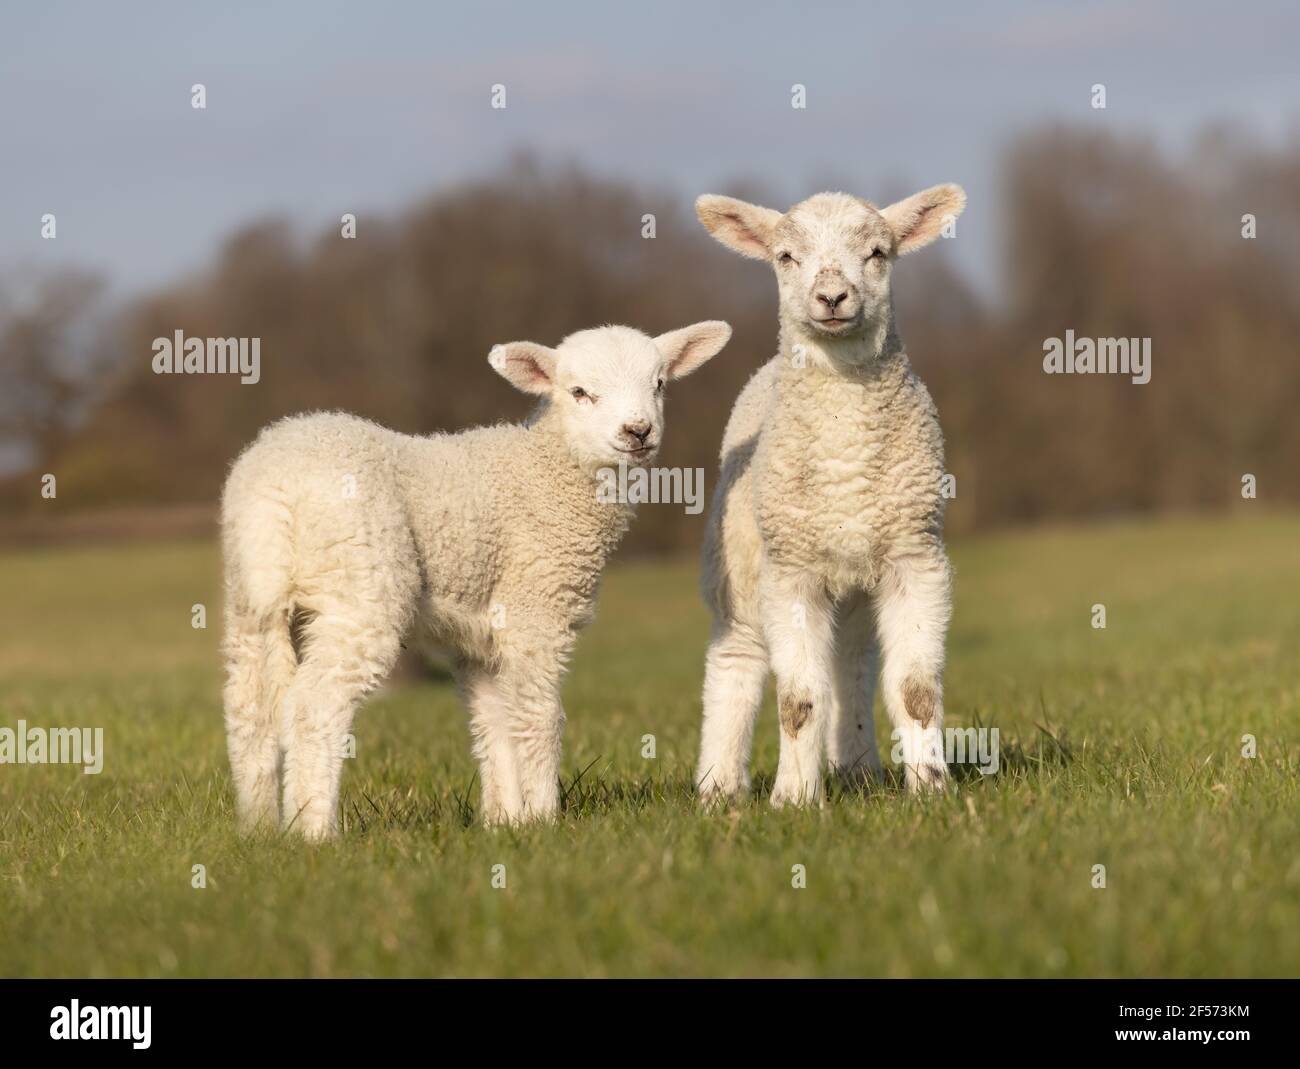 Two young lambs isolated in a field looking to camera. Hertfordshire. UK Stock Photo